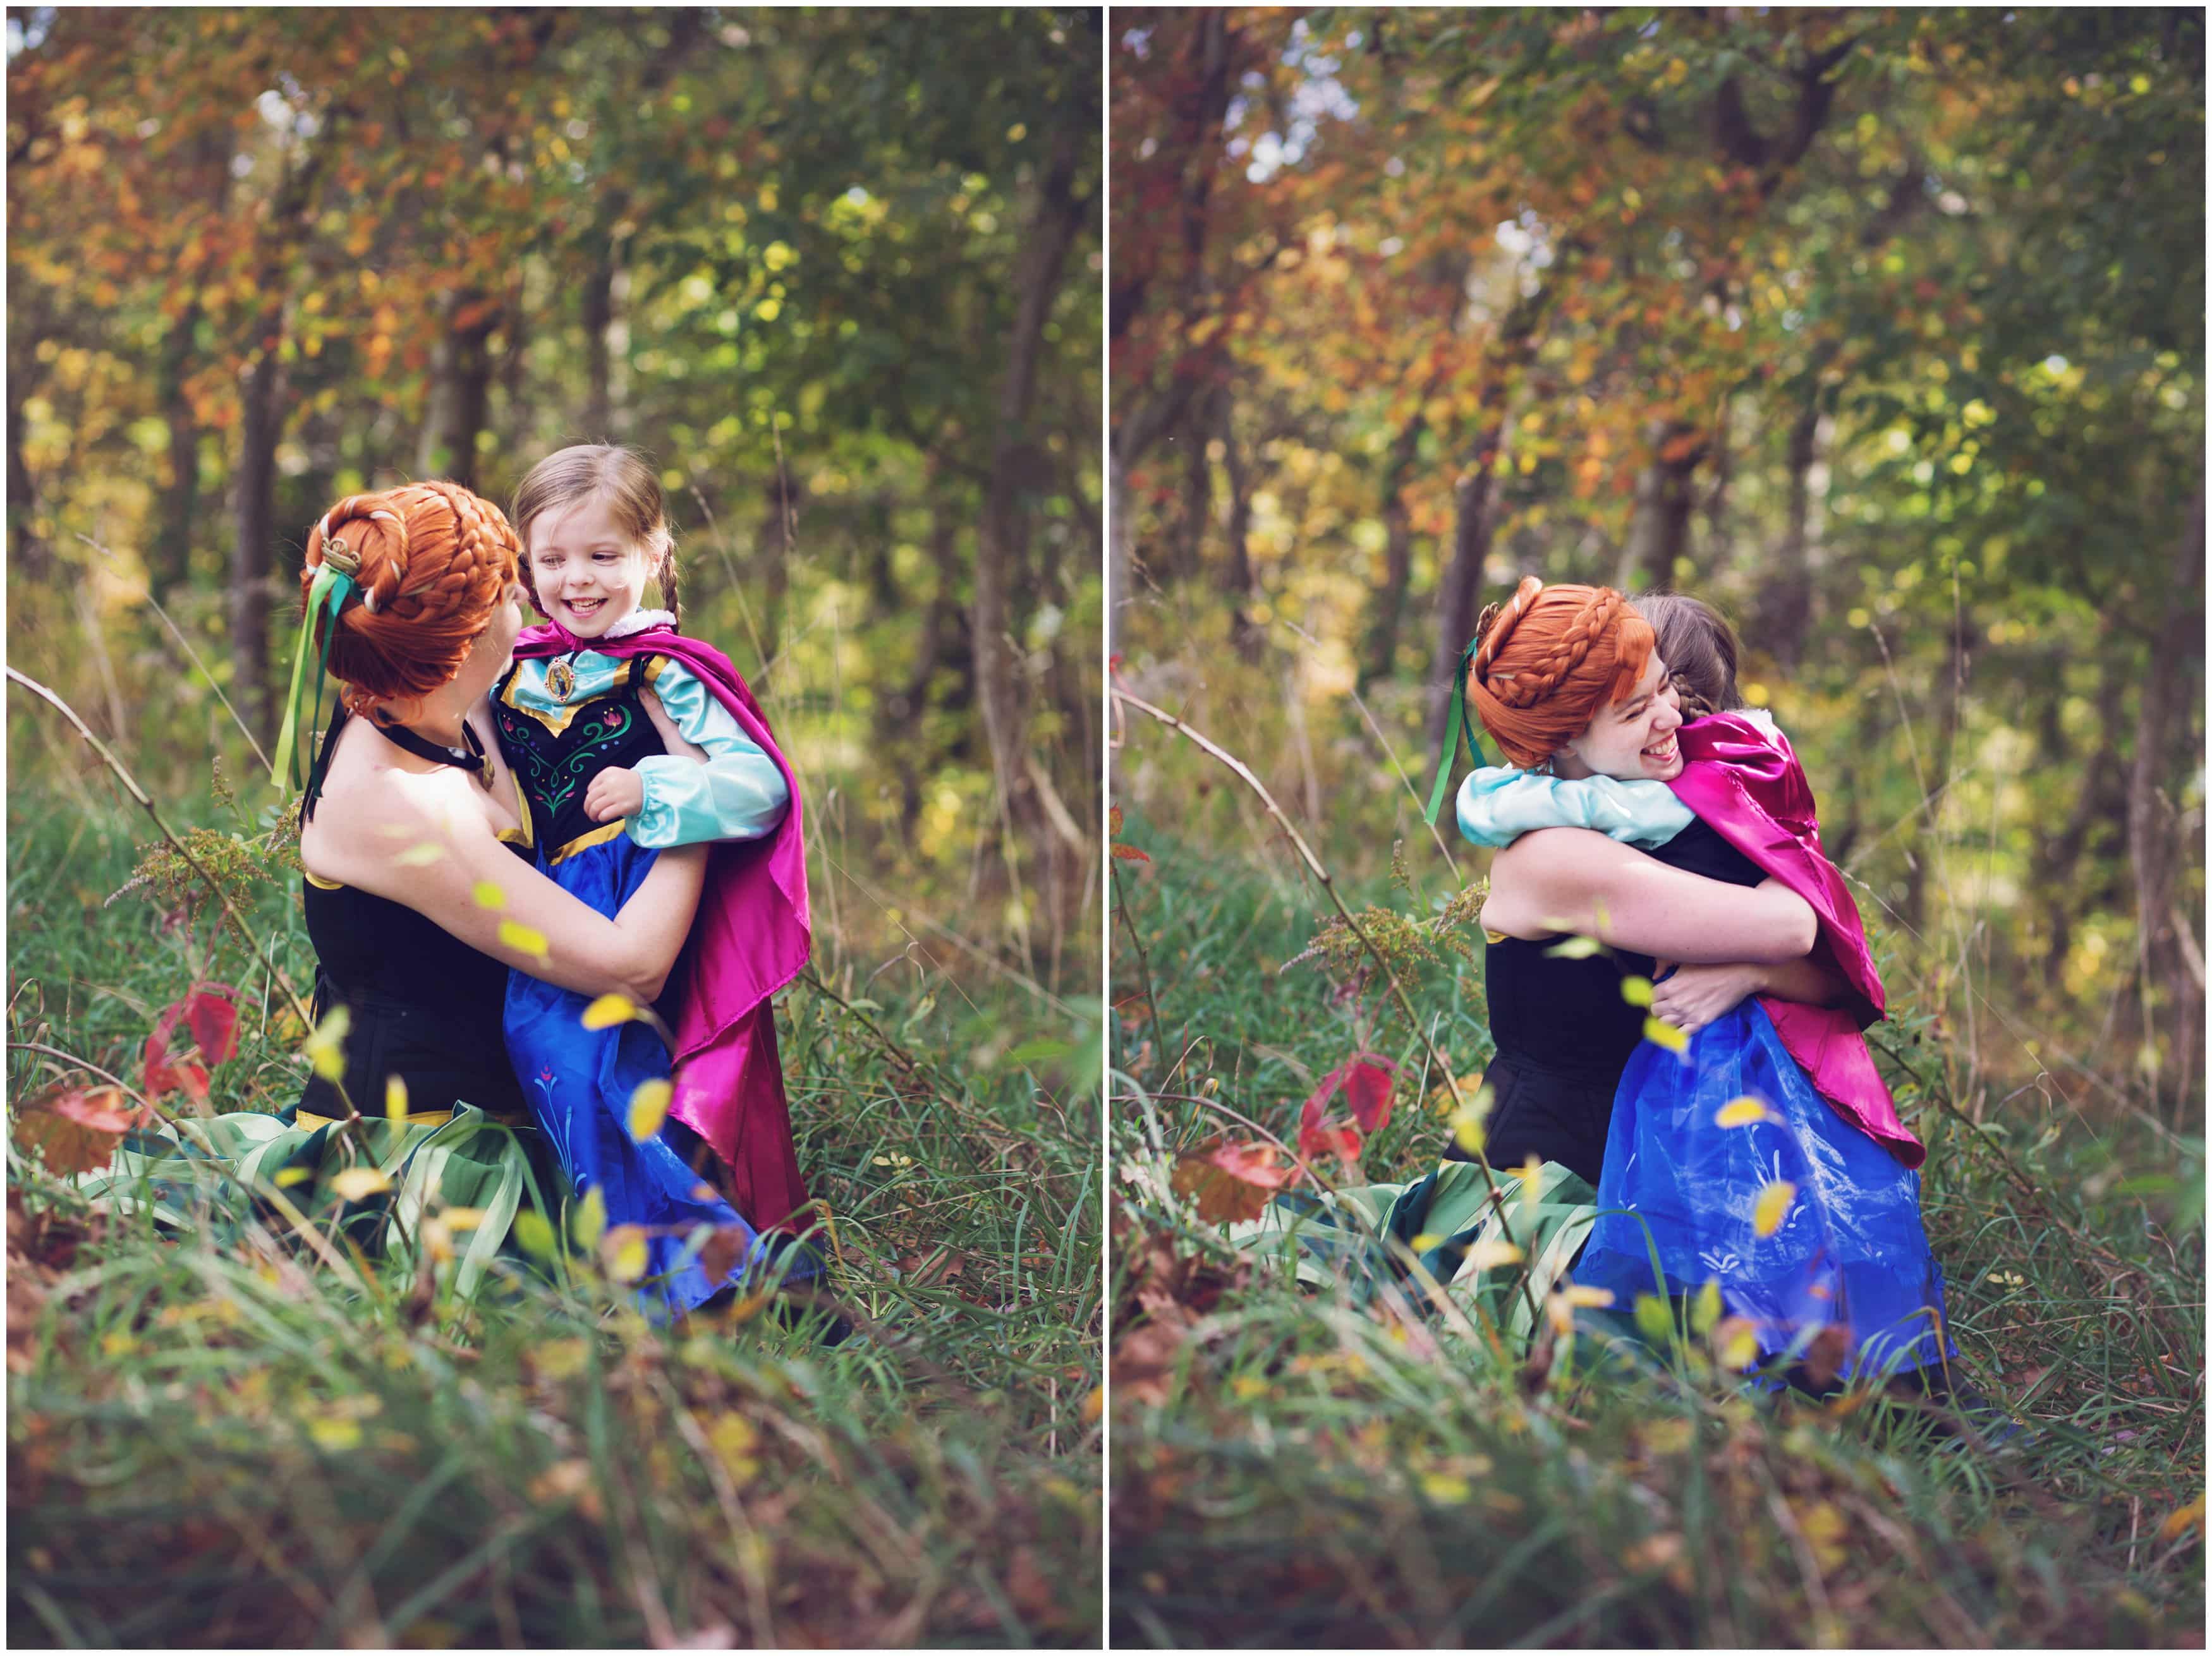 little girl hugging with woman dressed as Princess Anna from Frozen, fall Storybook portrait session